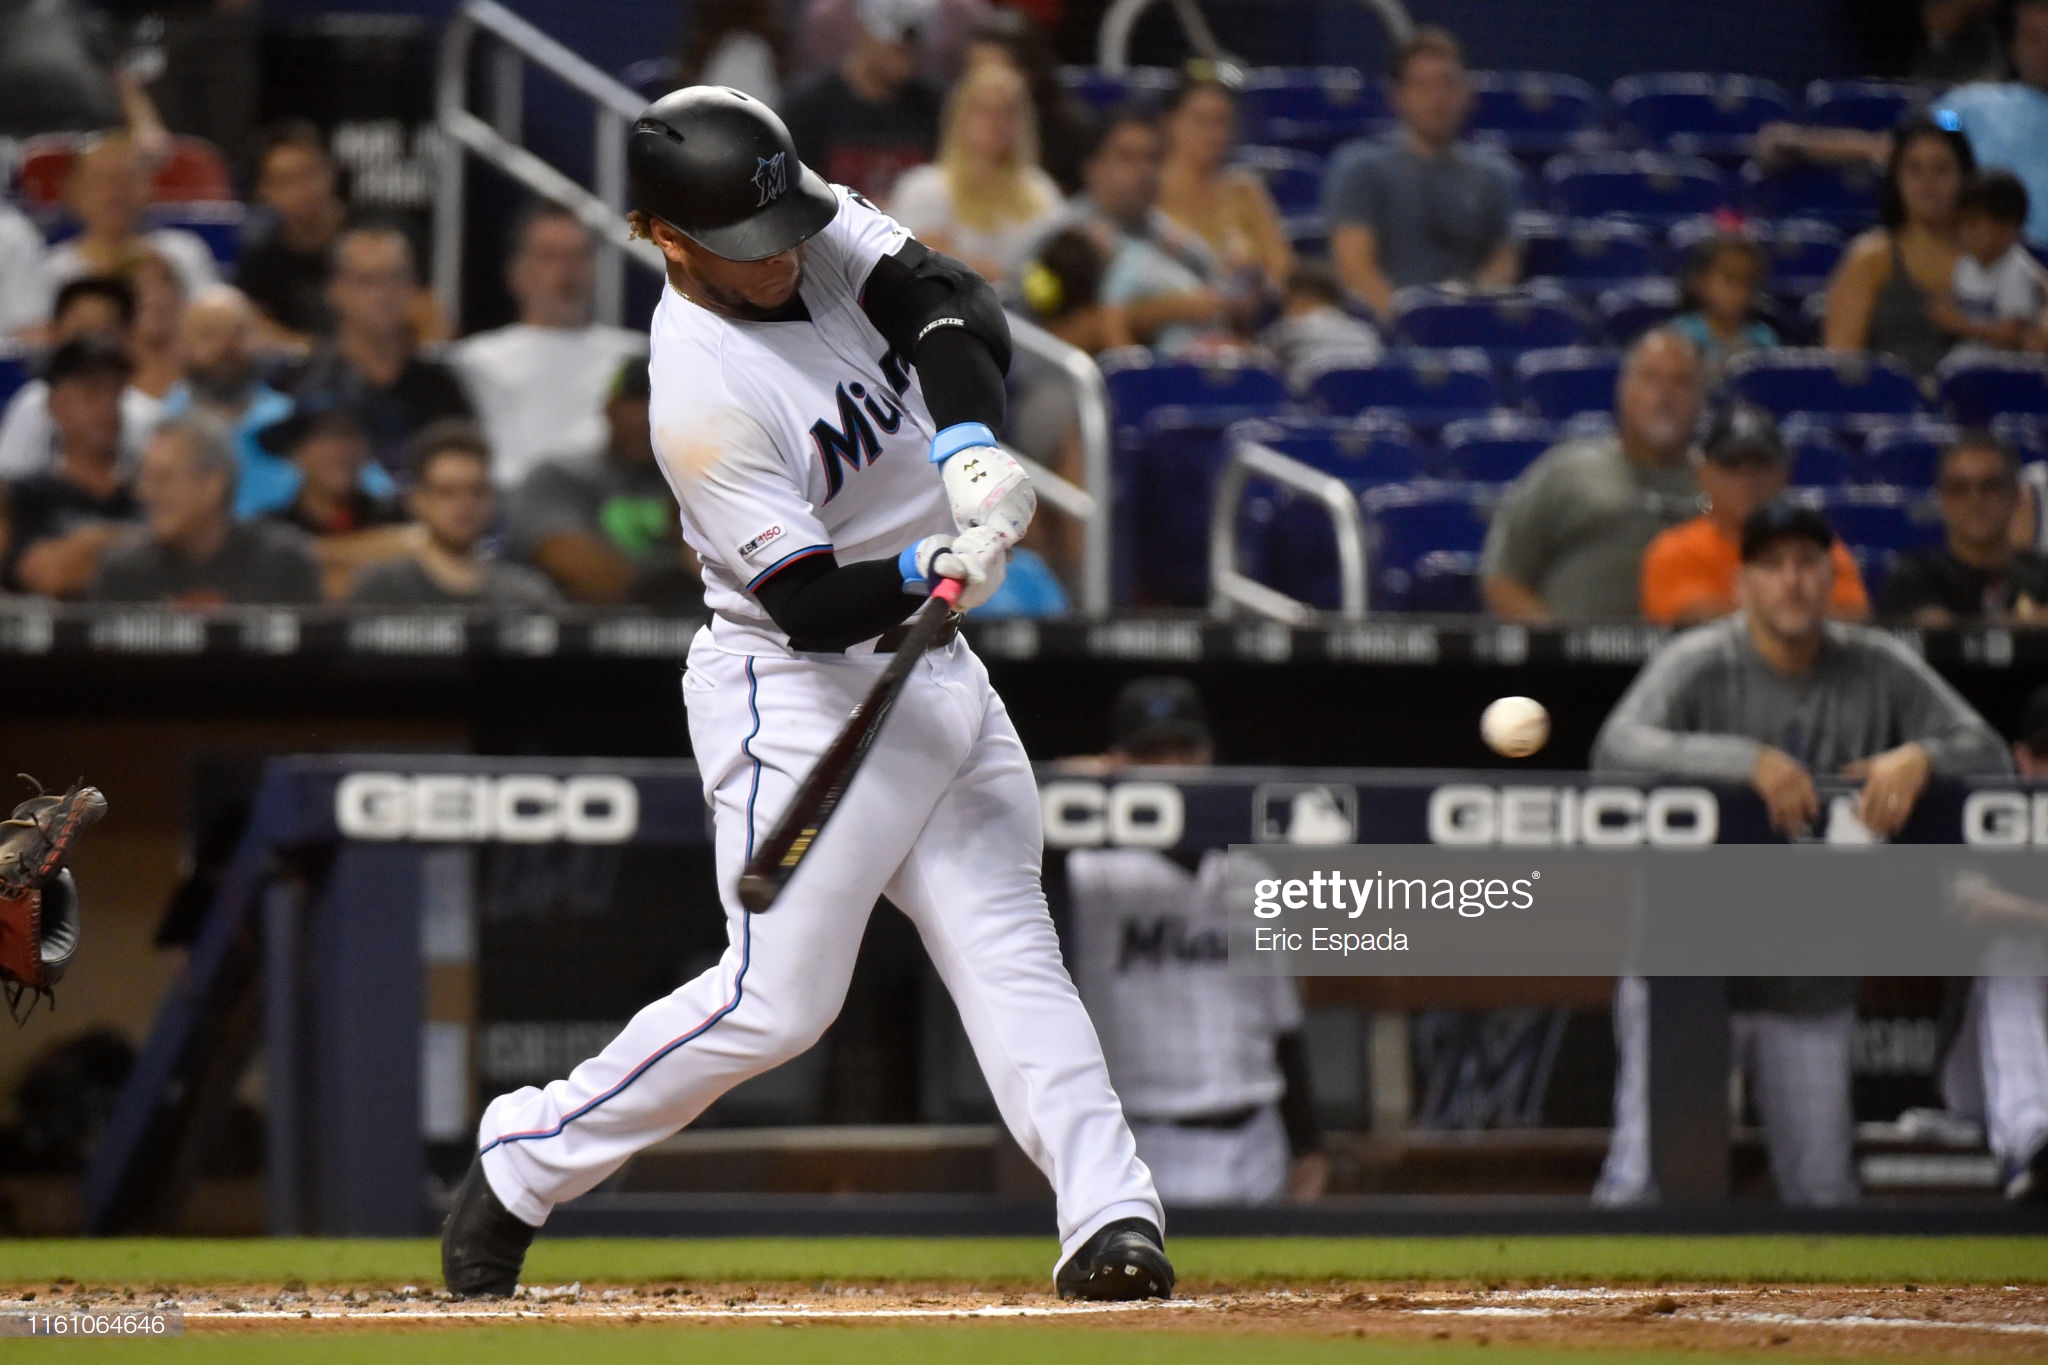 MIAMI, FL - AUGUST 11: Harold Ramirez #47 of the Miami Marlins hits an RBI double in the first inning against the Atlanta Braves at Marlins Park on August 11, 2019 in Miami, Florida. (Photo by Eric Espada/Getty Images)